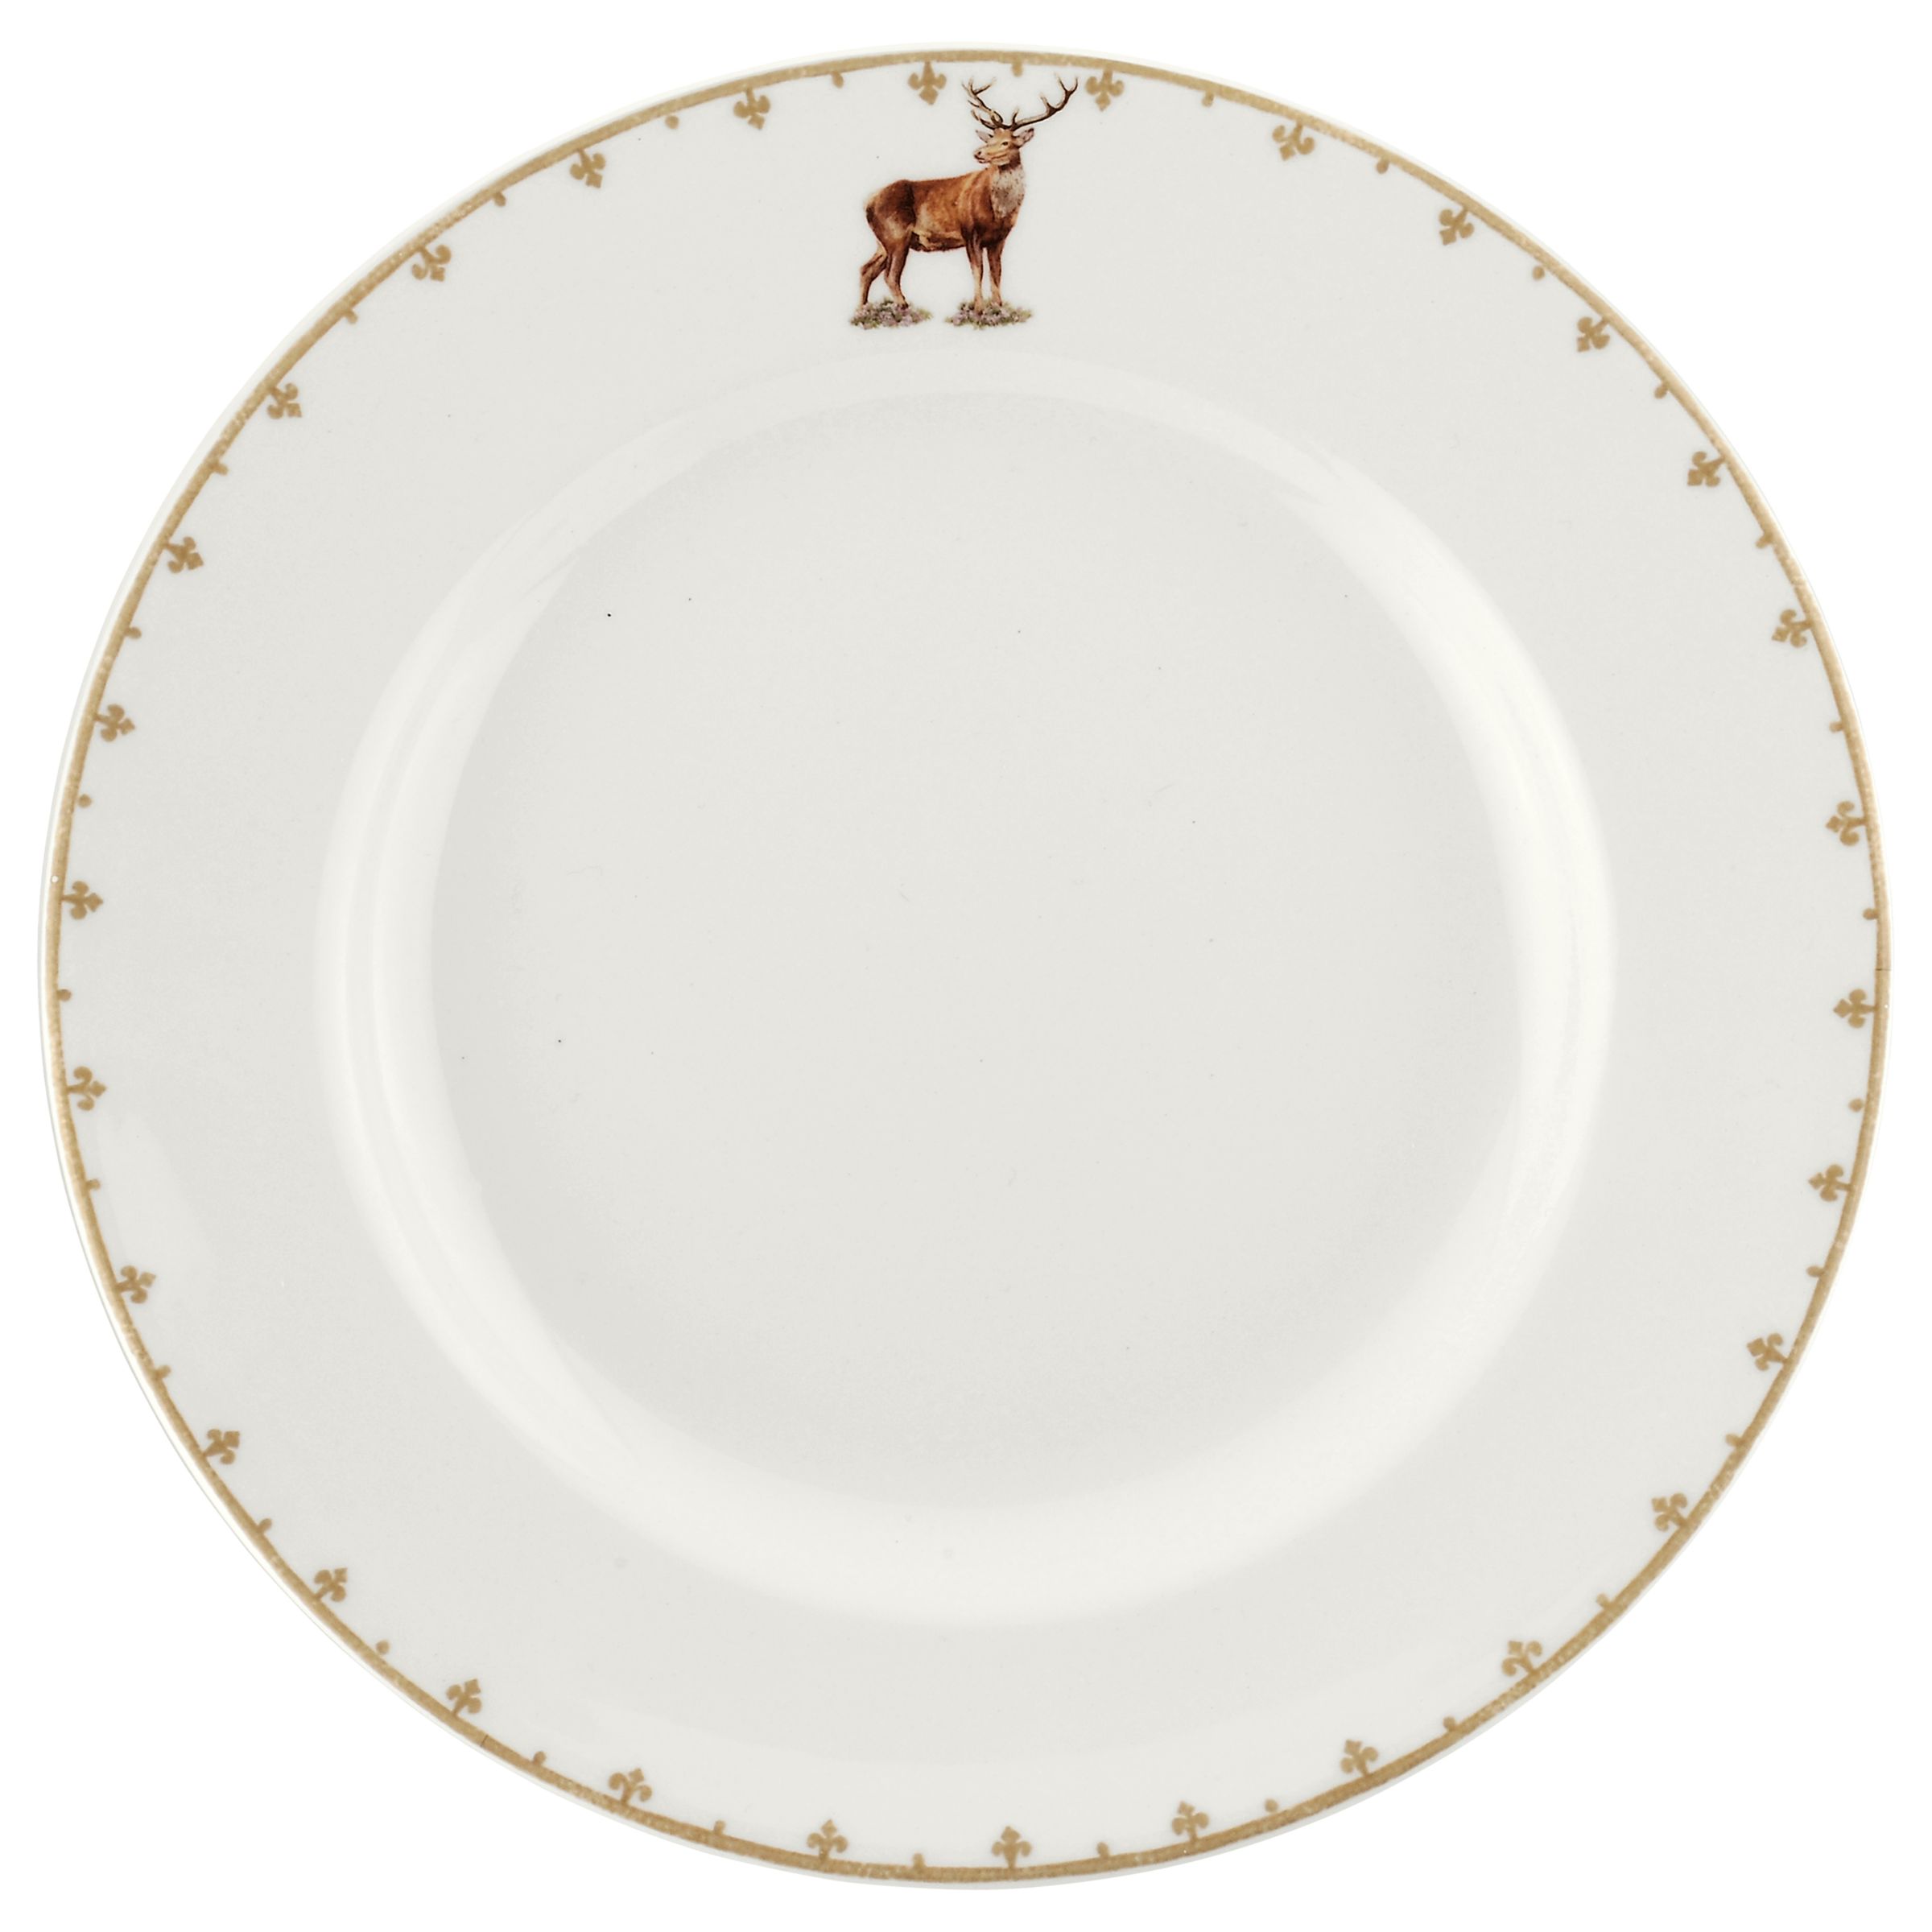 Spode Glen Lodge Stag Dinner Plate Review